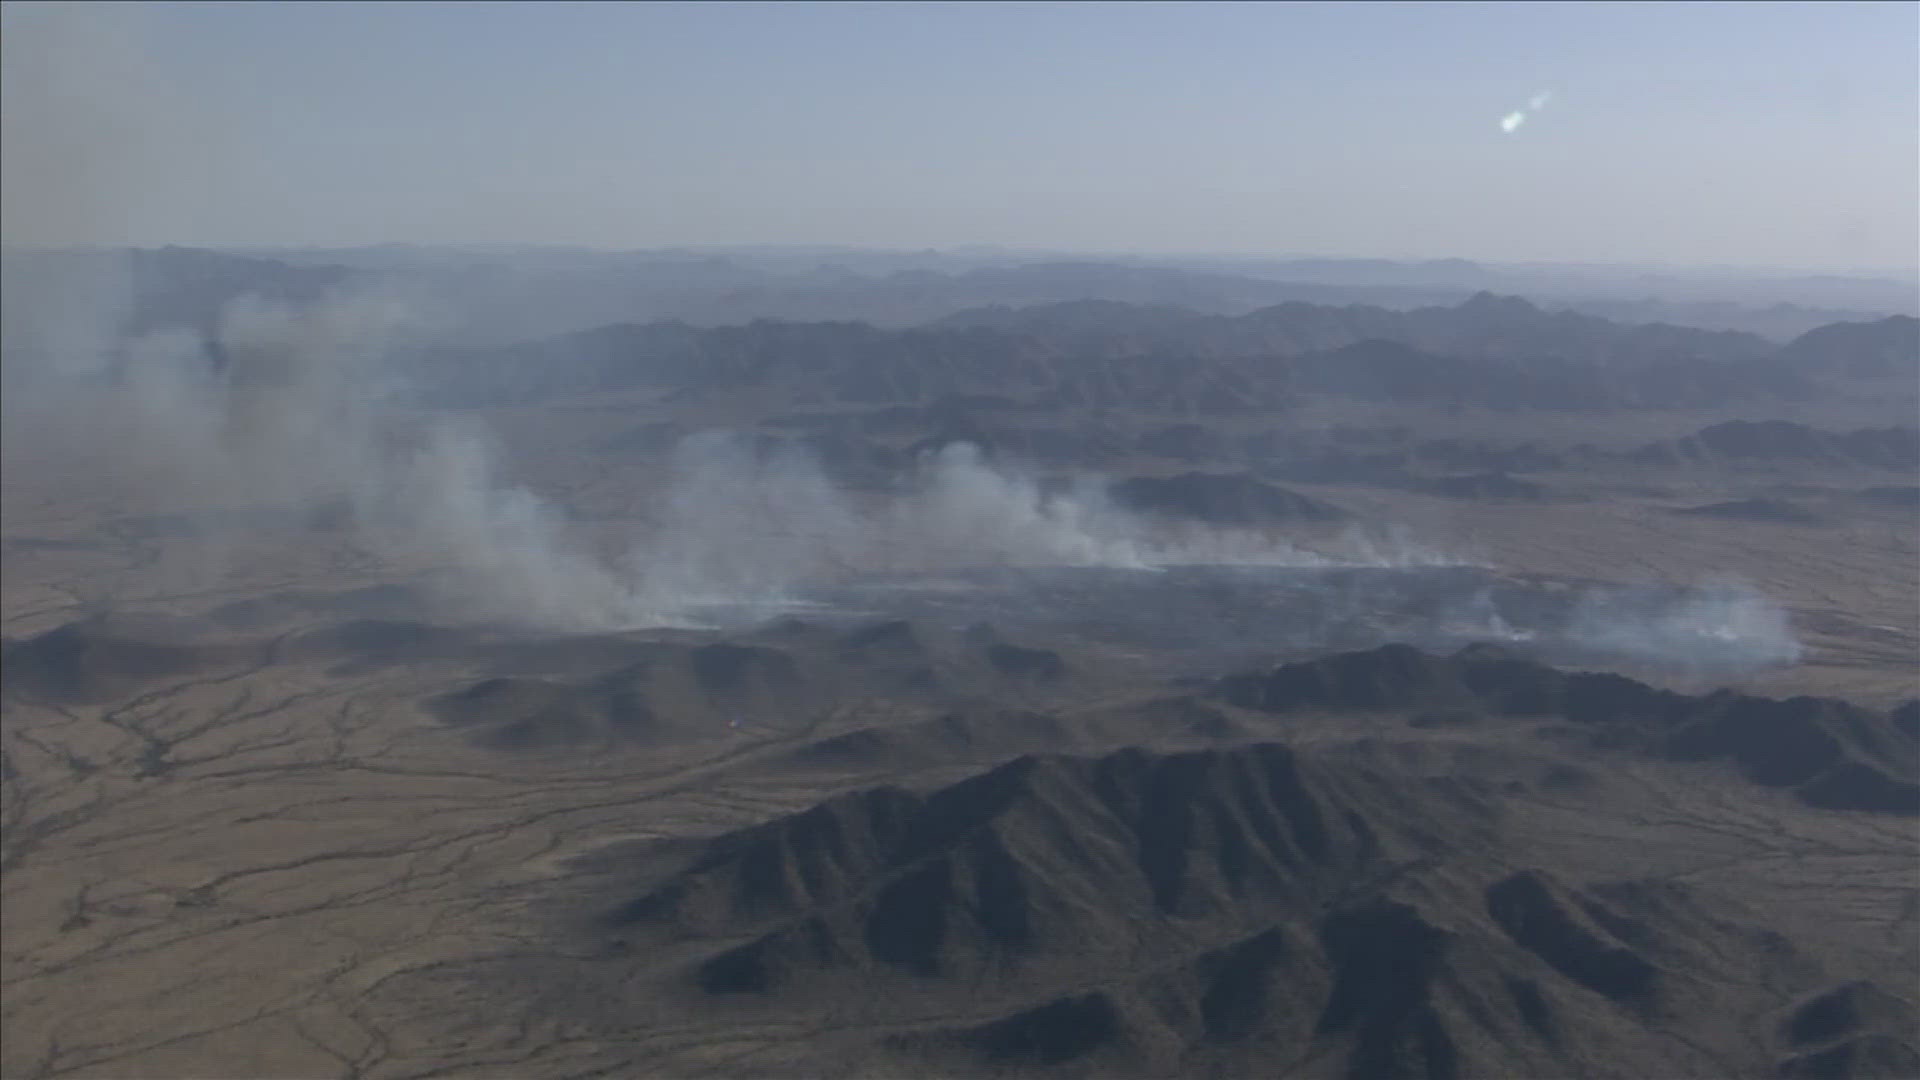 The Flying Bucket Fire is one of 3 wildfires burning in Arizona right now. Here's the latest on all of them.